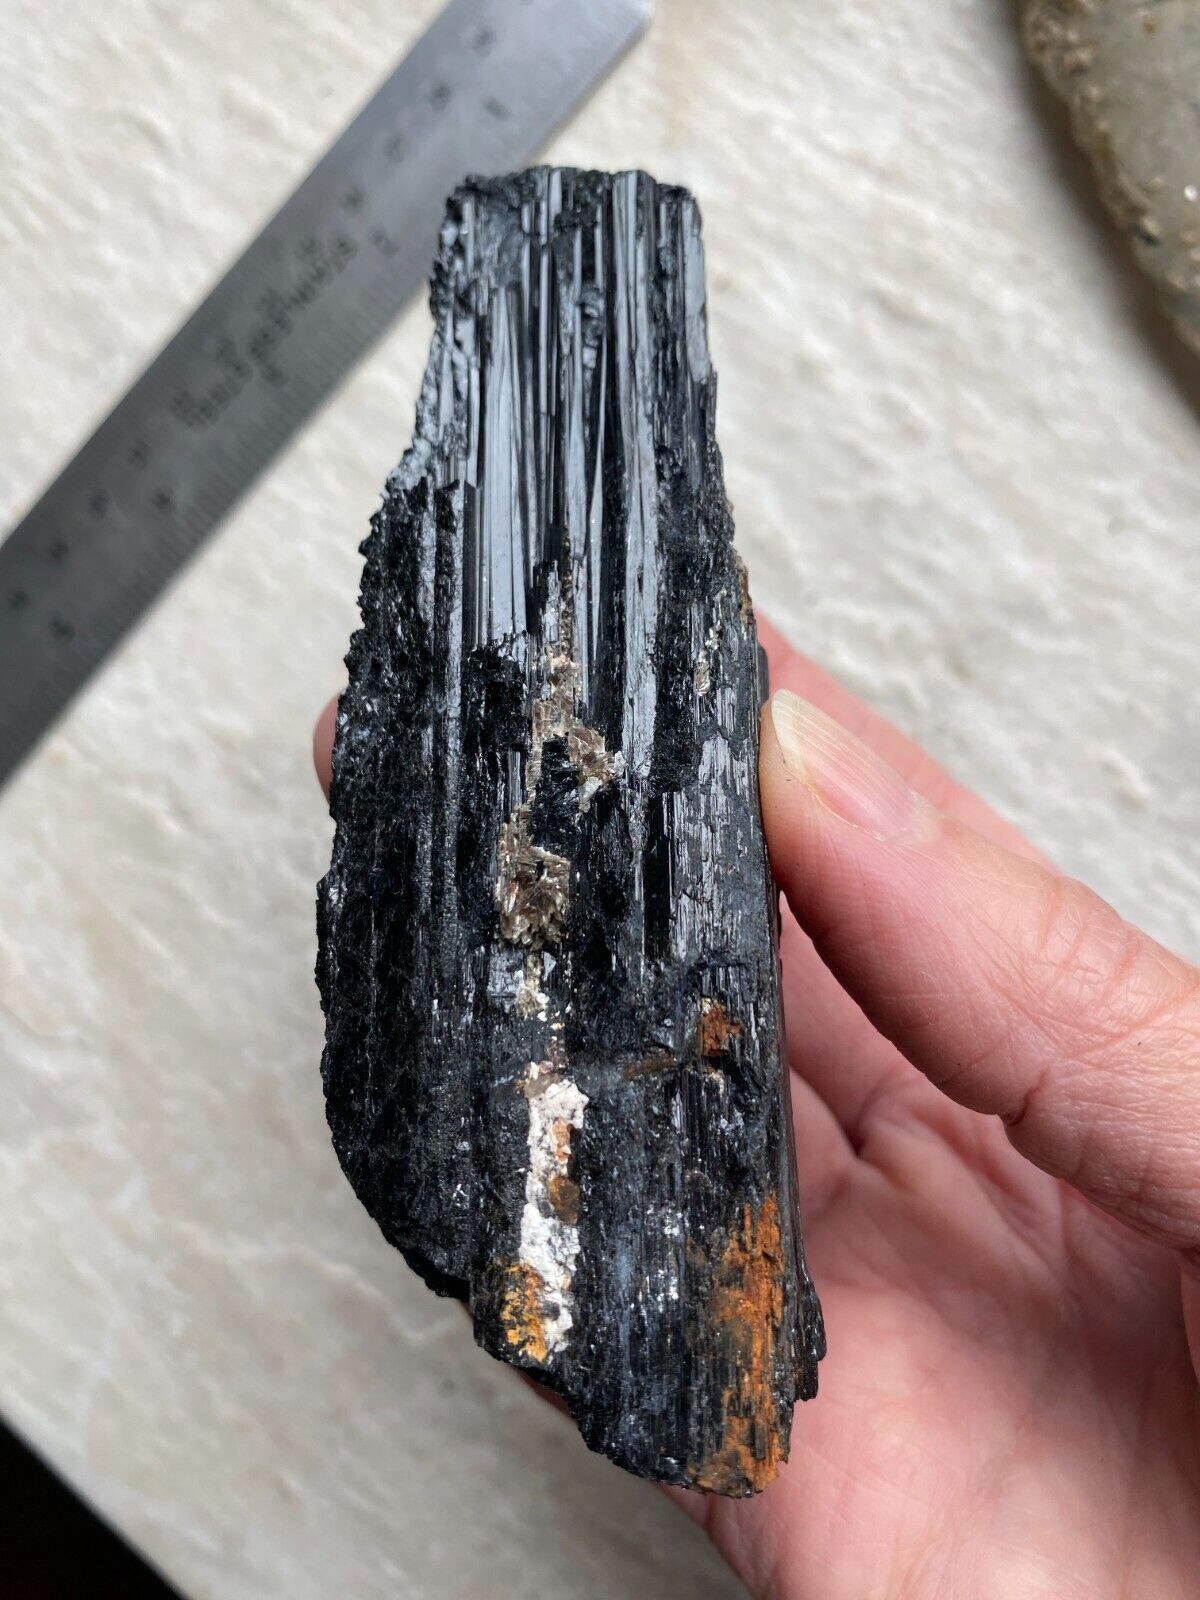 Black Tourmaline With Mica Crystals -Large Schorl Stones 170 Grams